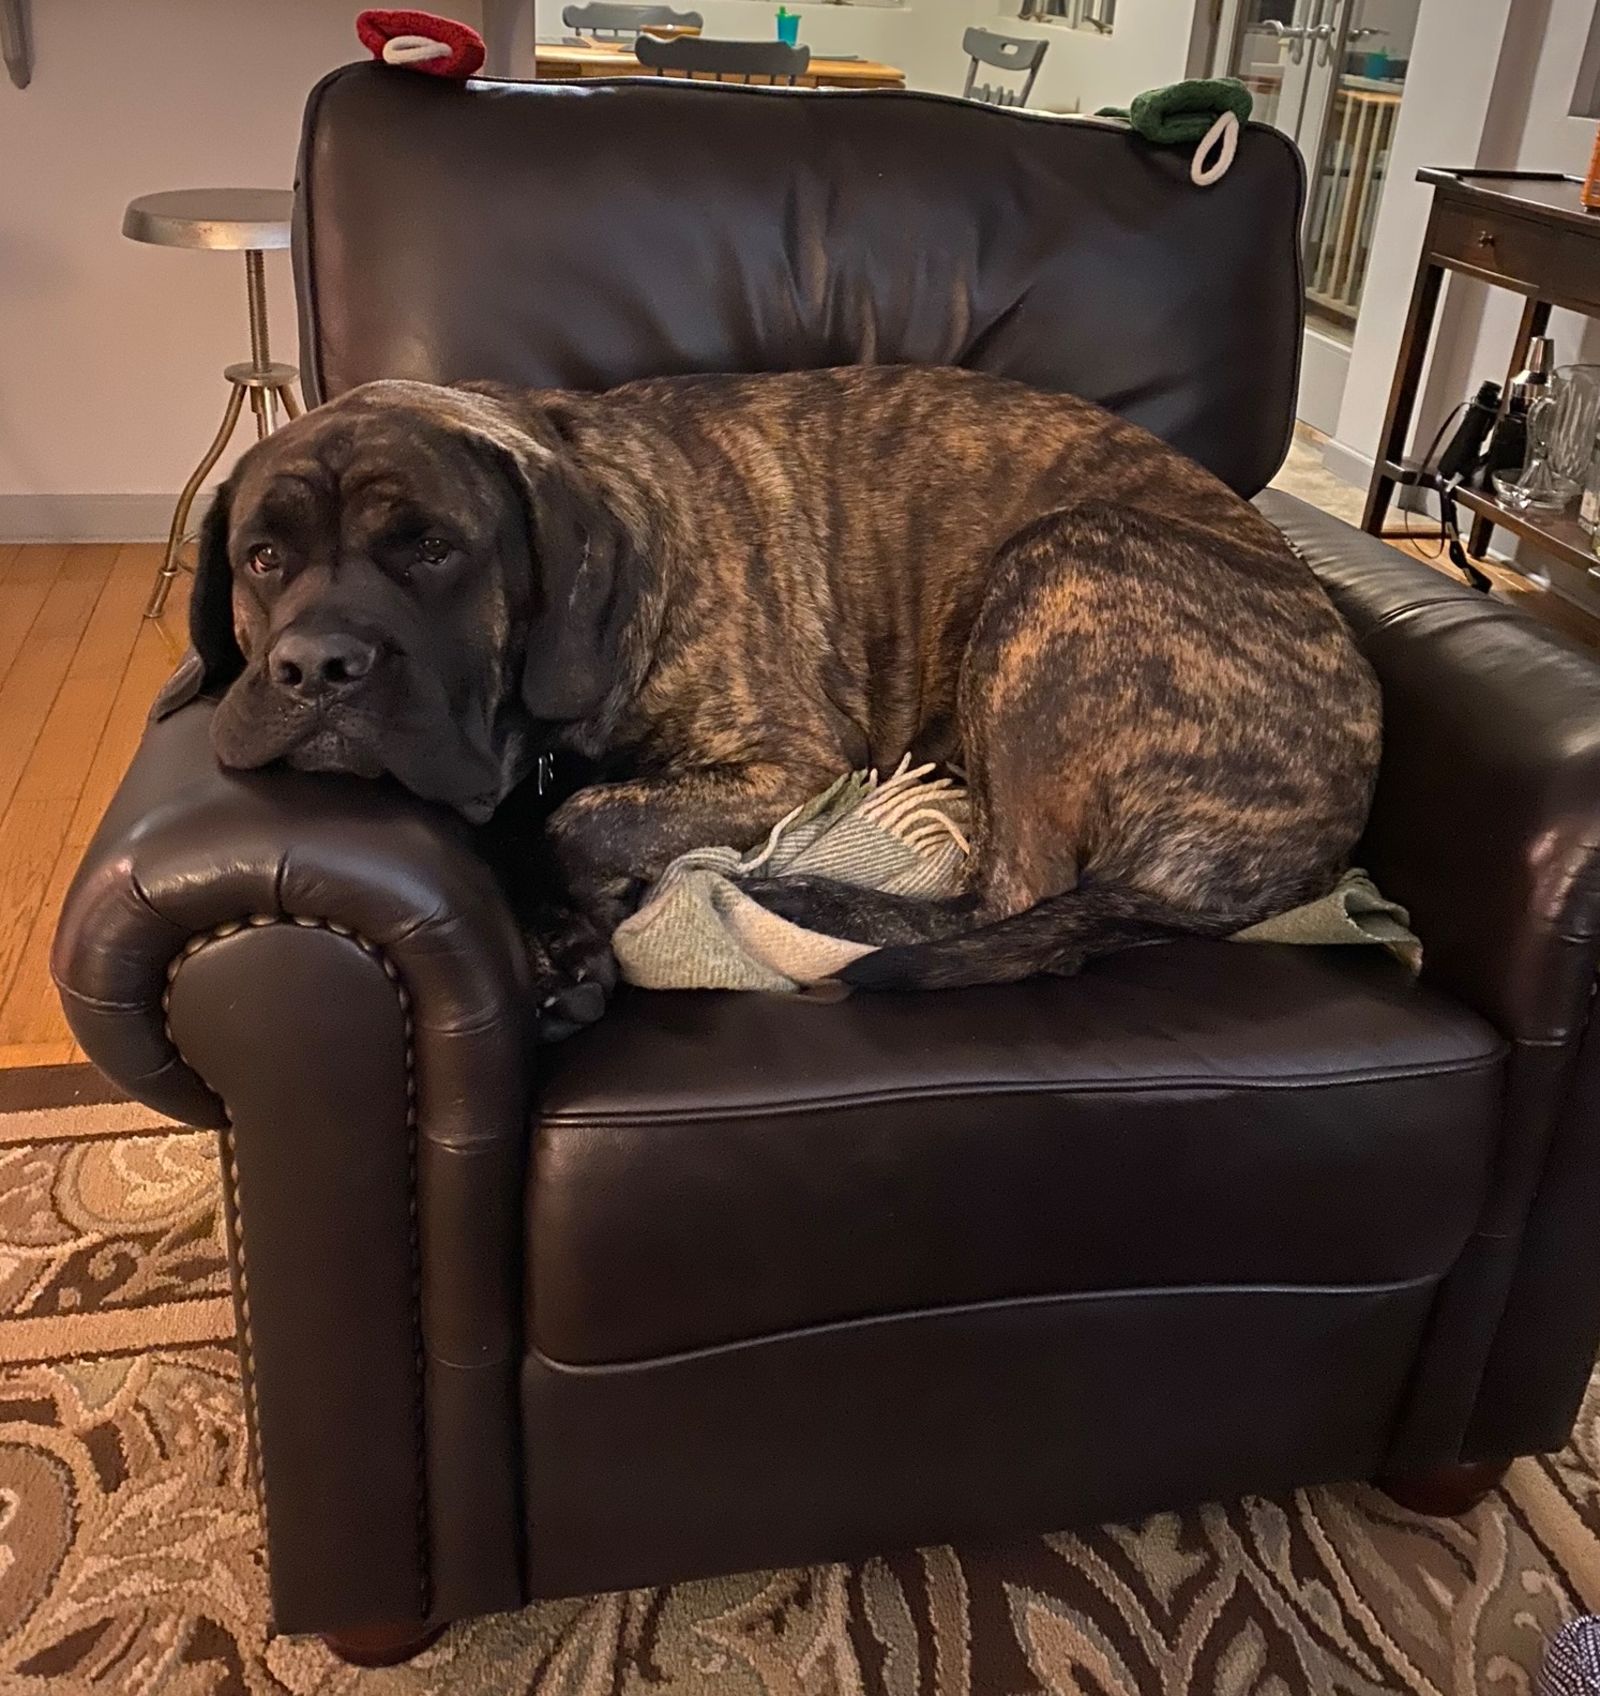 This picture does not do the size of this chair and thus the size of this dog justice.